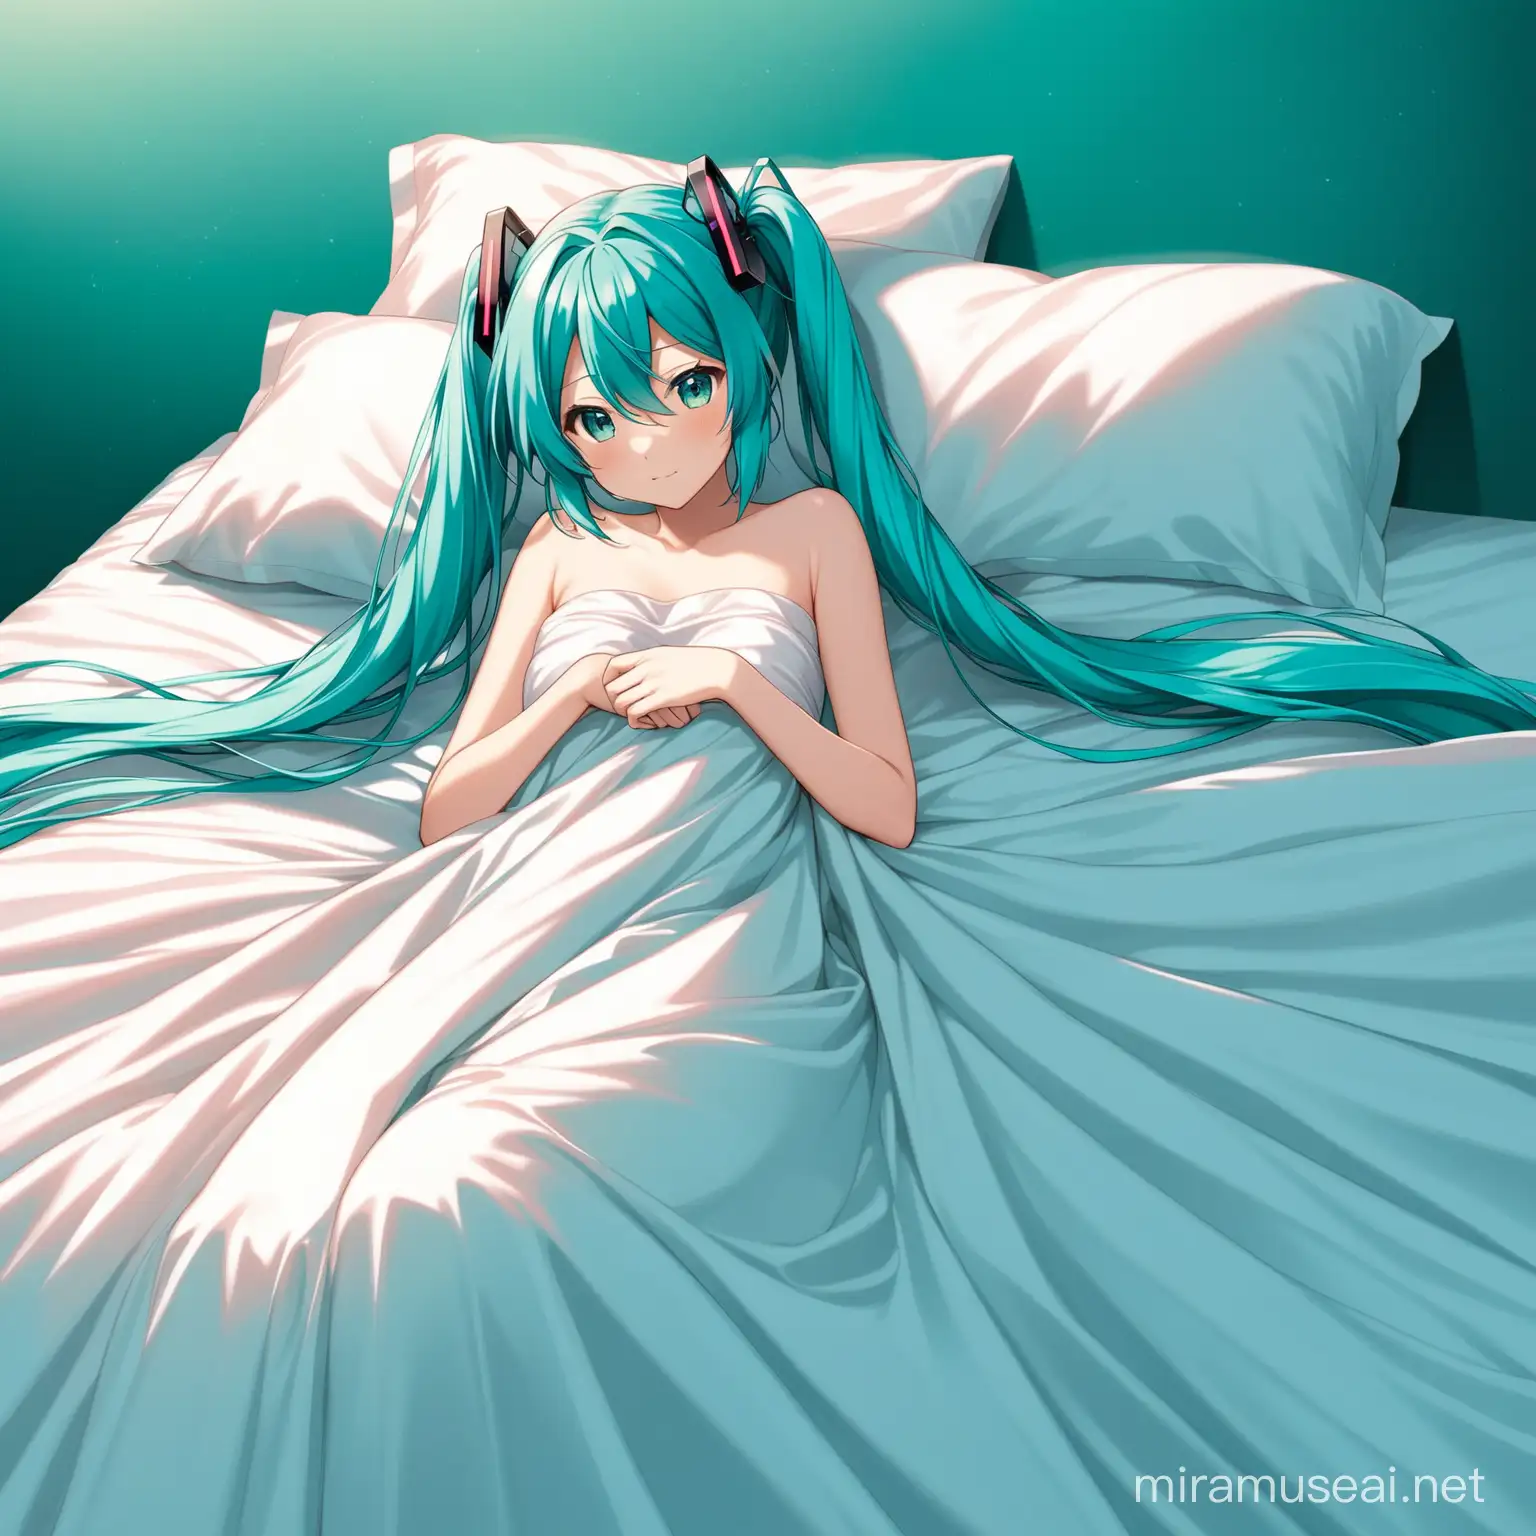 hatsune miku laying on teal satin bed covered with sheets and strapless